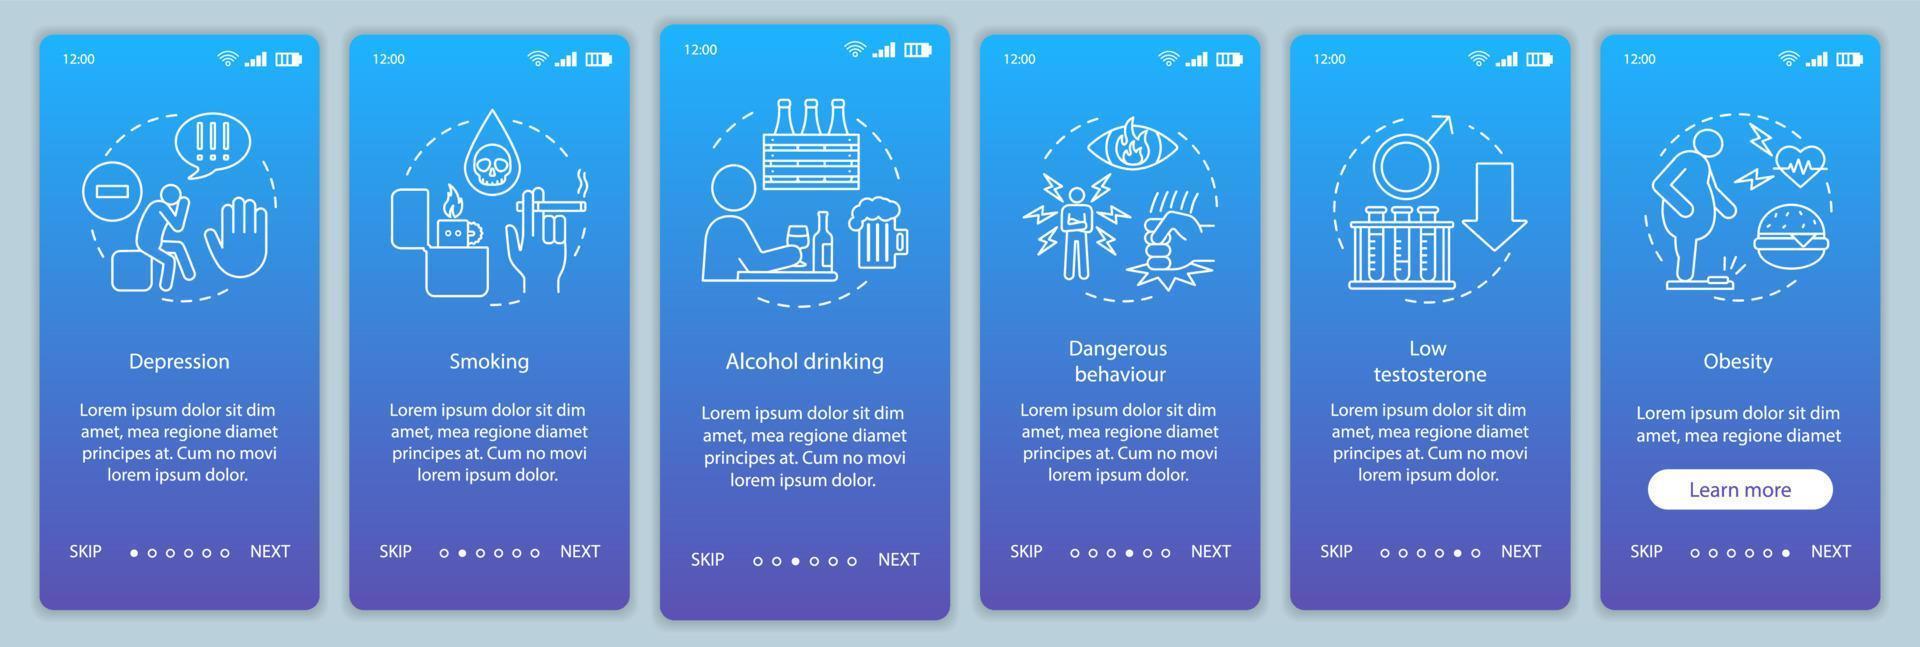 Men's health risks factors onboarding mobile app page screen vector template. Smoking, obesity, alcohol. Walkthrough website steps with linear illustrations. UX, UI, GUI smartphone interface concept